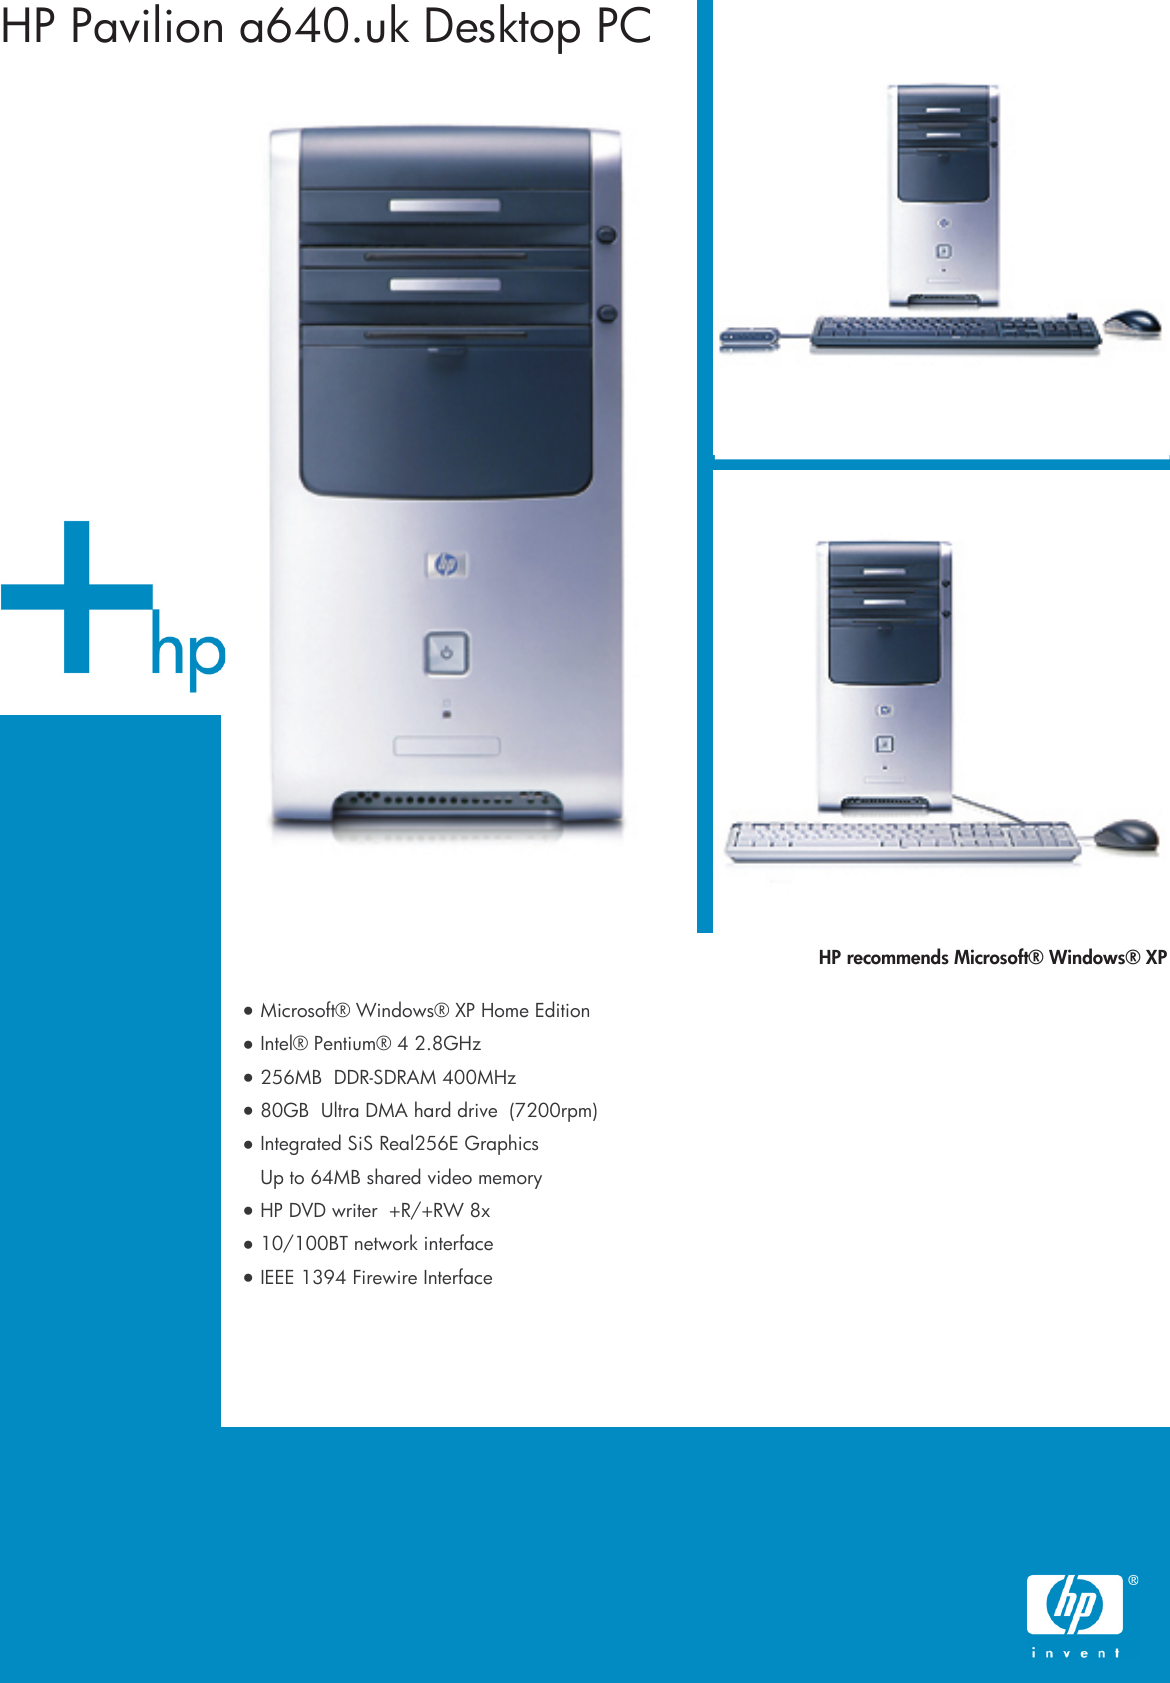 Page 1 of 2 - HP Summer Desktop Datasheet Pavilion PC - A640.uk Product Specifications C00242935